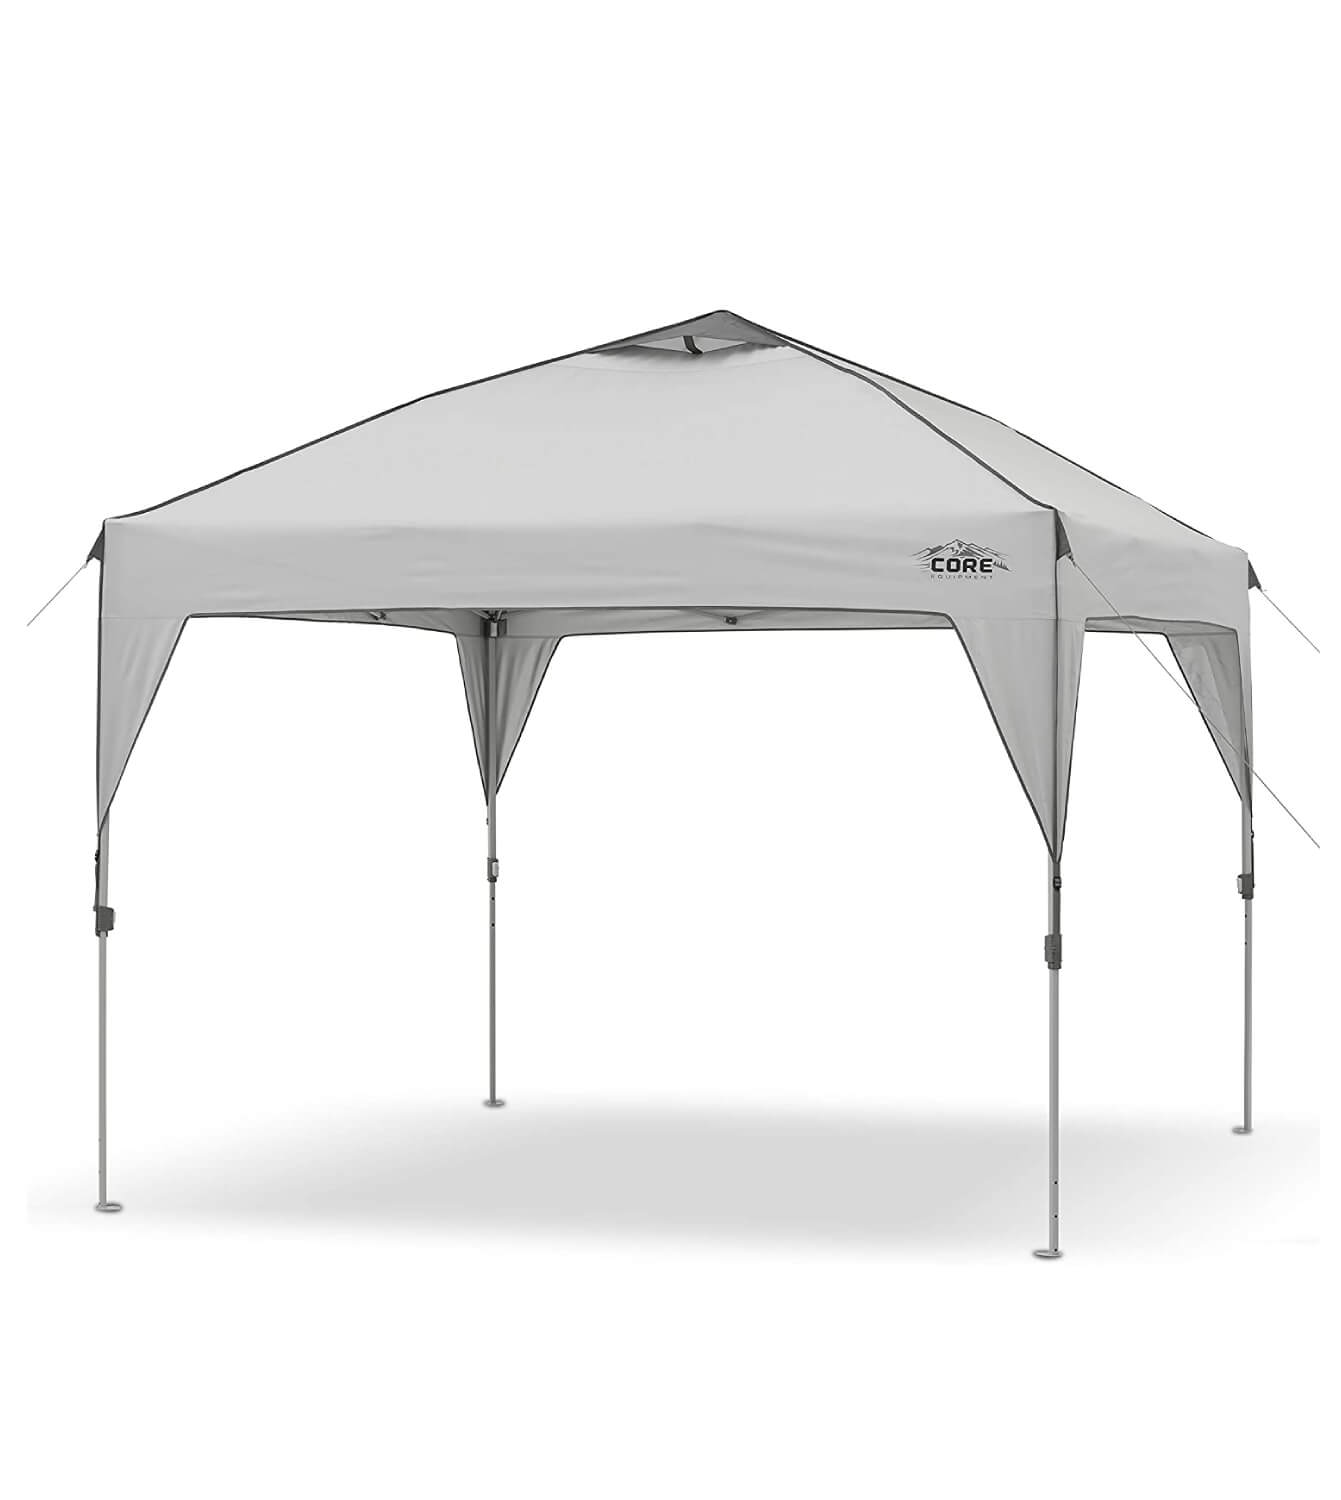 CORE 10′ x 10′ Instant Shelter Pop-Up Canopy Tent